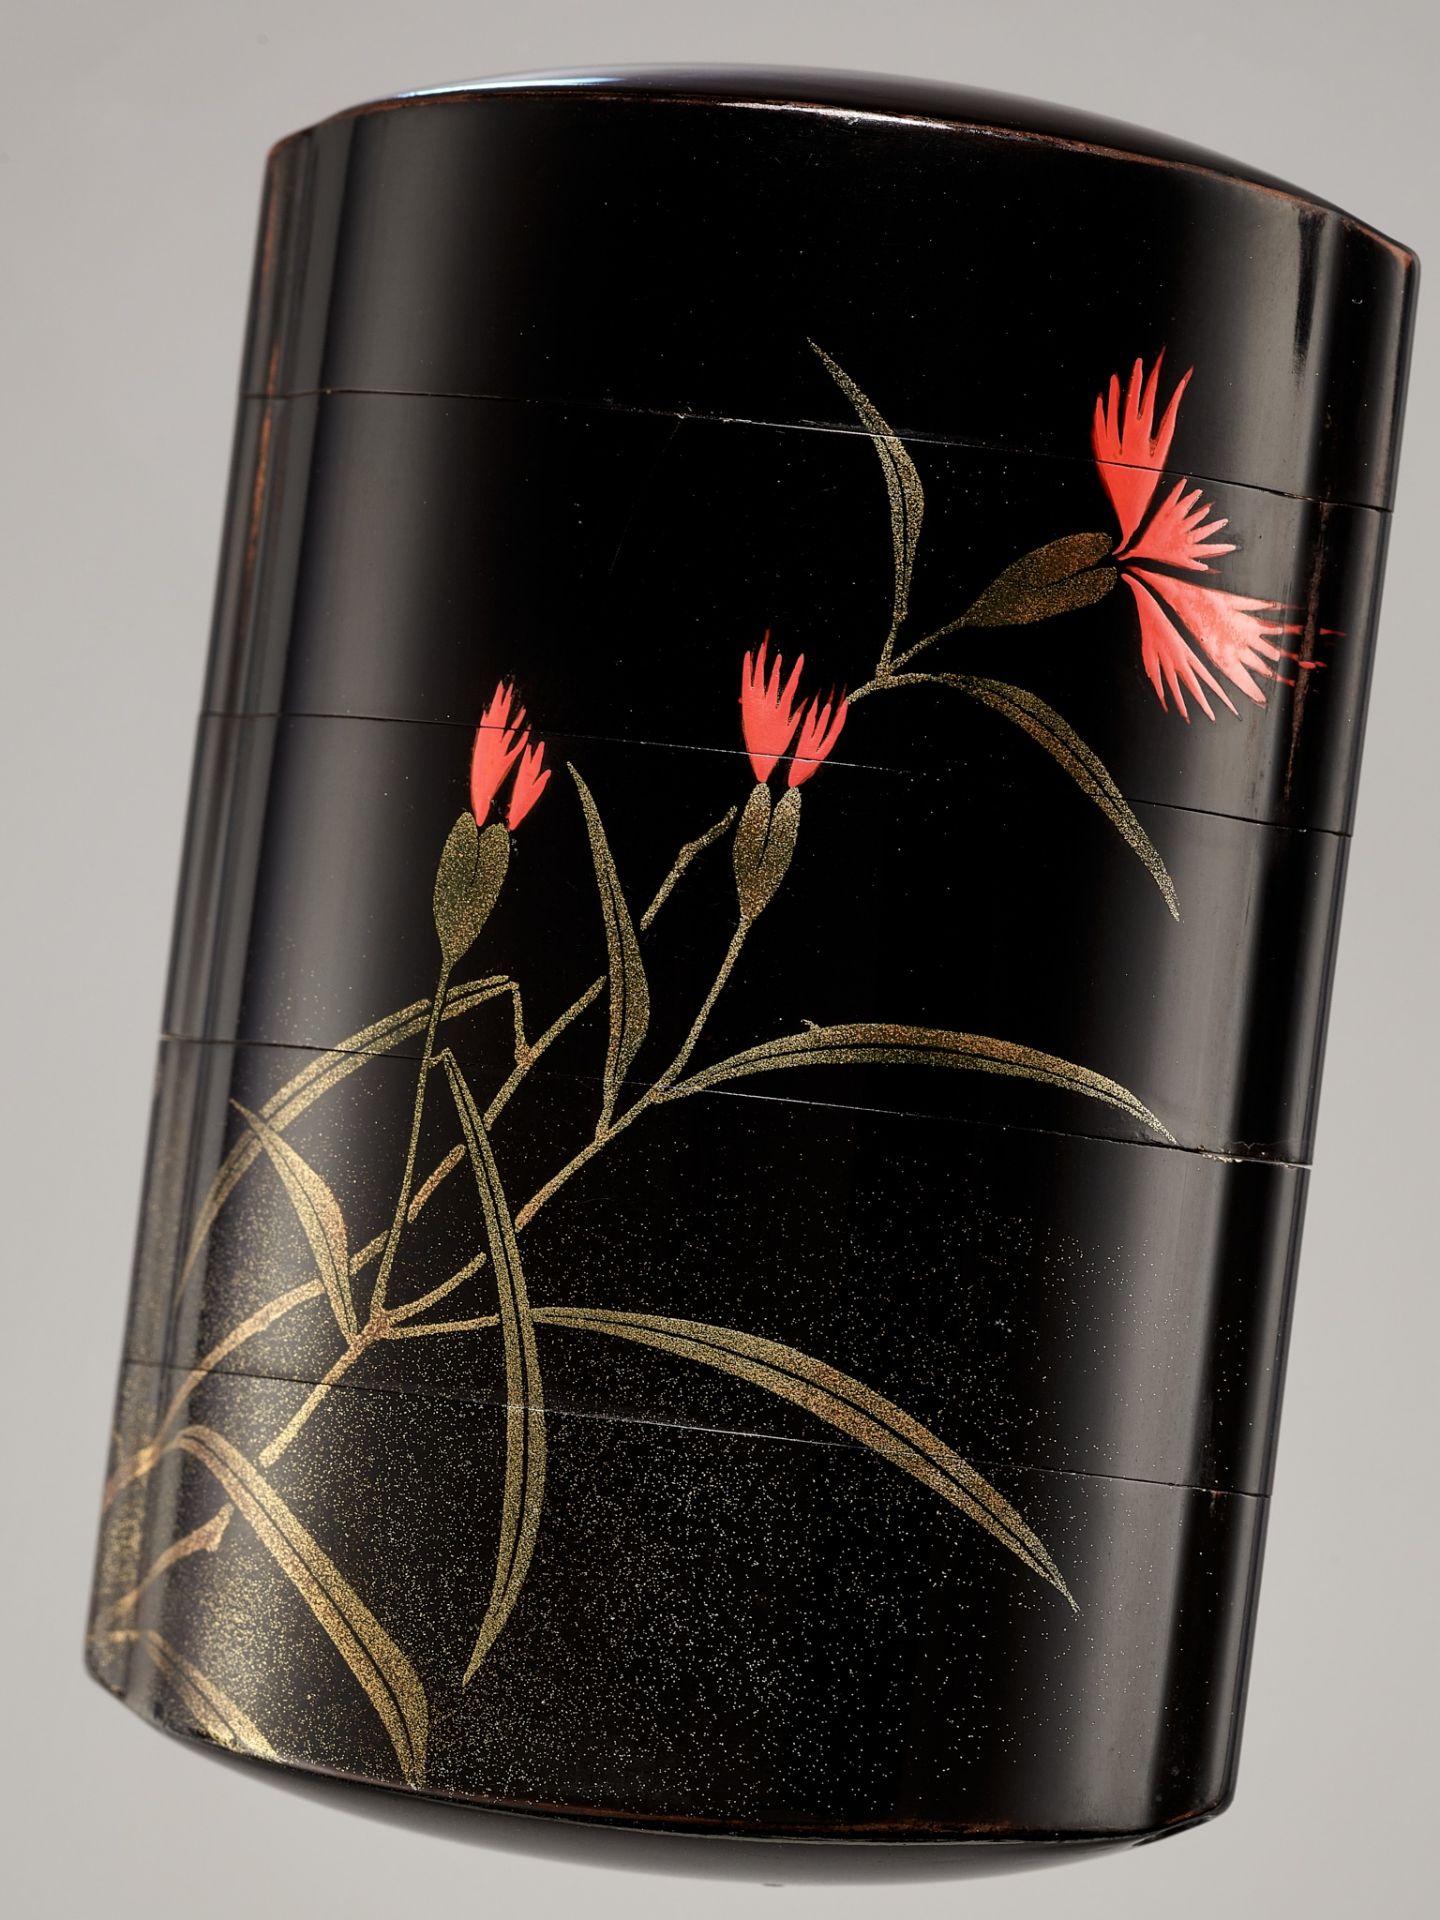 MOEI: A SUPERB FOUR-CASE TOGIDASHI LACQUER INRO DEPICTING A DRAGONFLY - Image 2 of 7